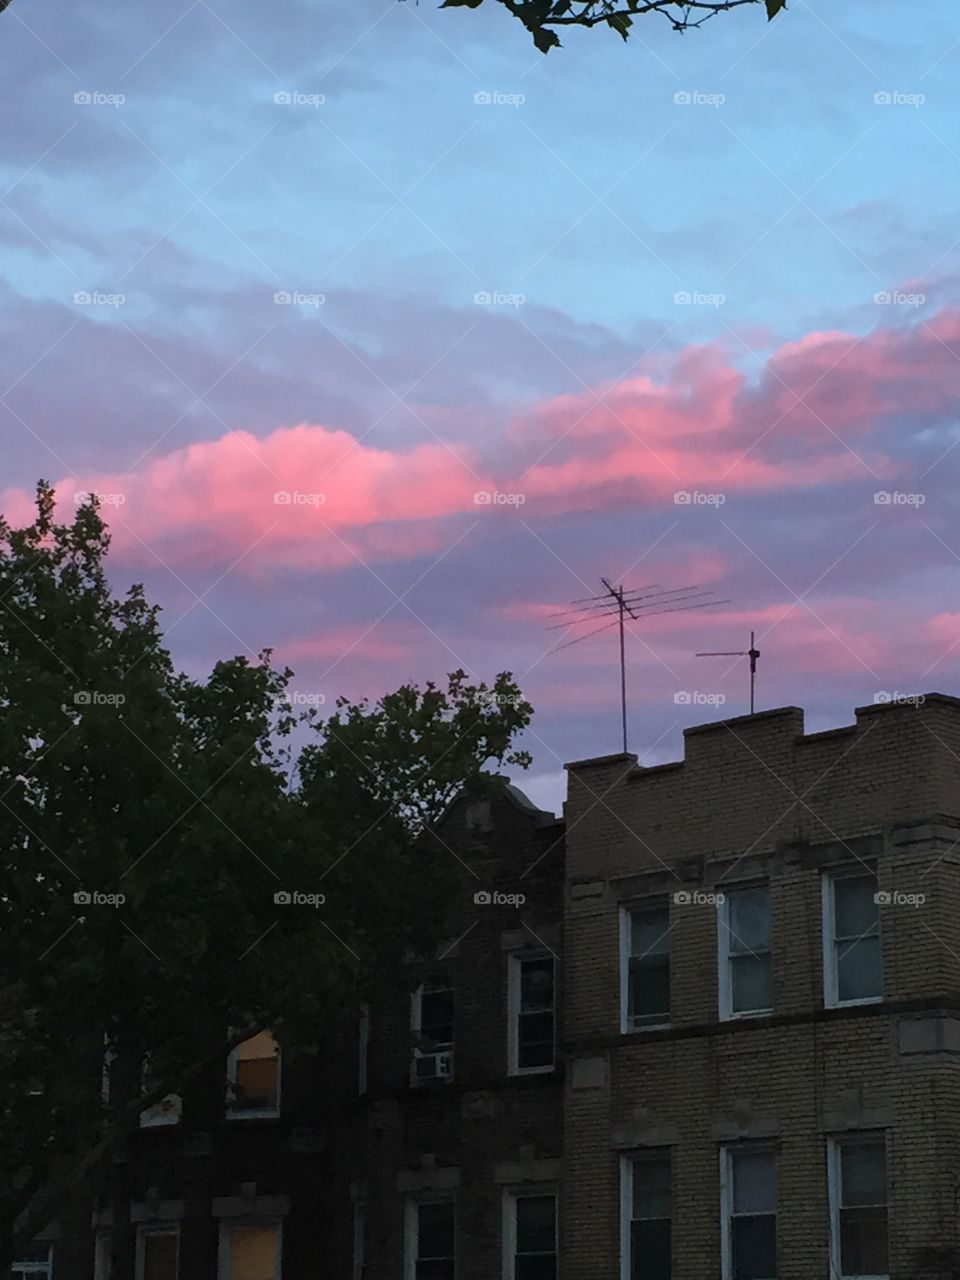 Red sky at night. Sailor's delight! Taken in Brooklyn as the sun was setting and the sky lit up pink against the clouds. Beautiful 